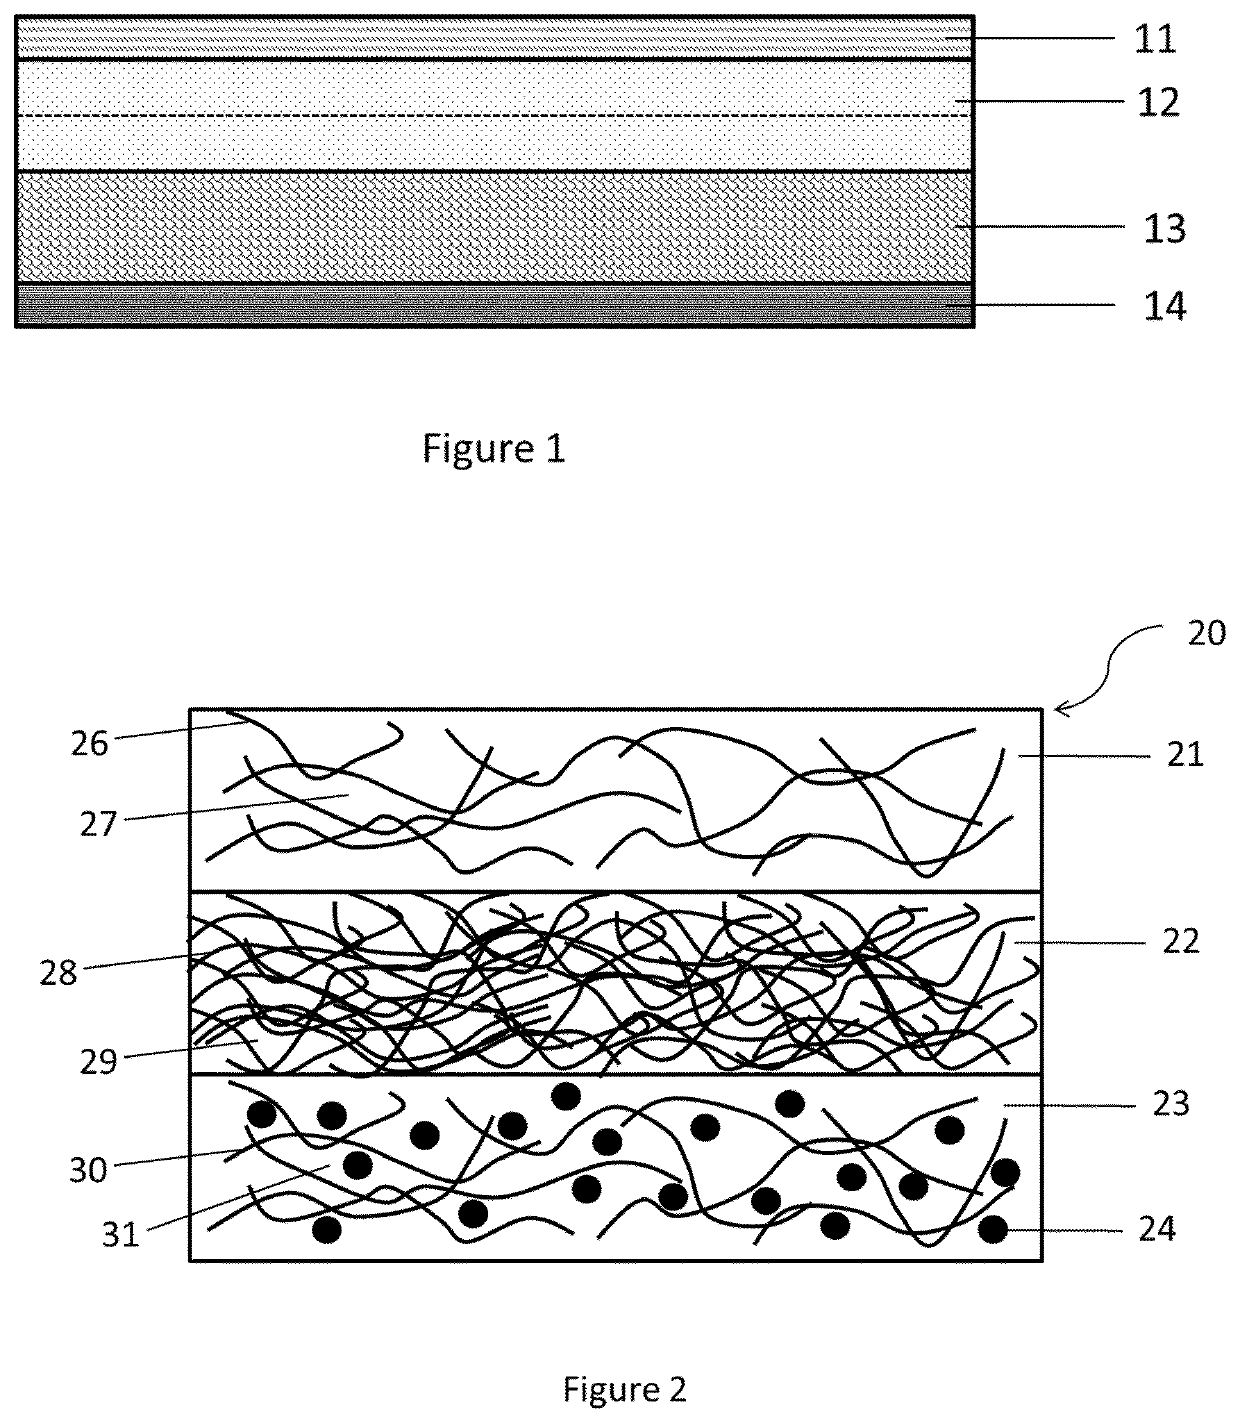 Multi-layered non-woven structure for use as a component of disposable absorbent articles